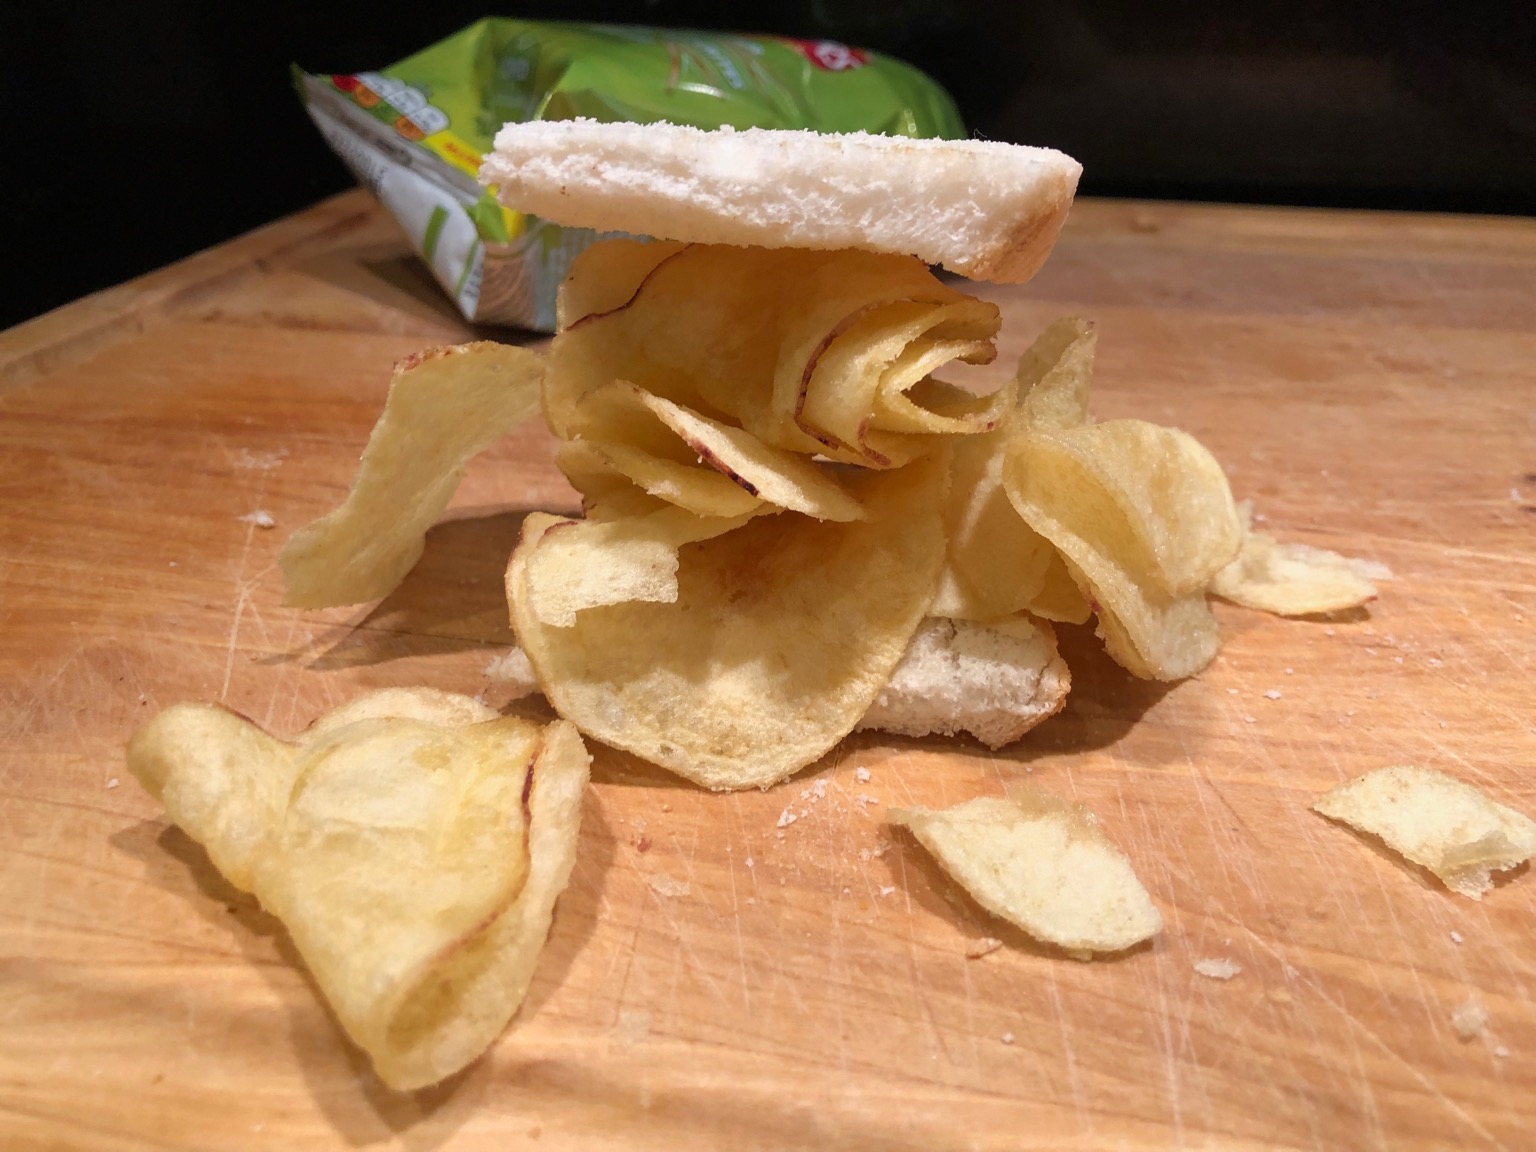 White sliced bread overflowing with potato crisps